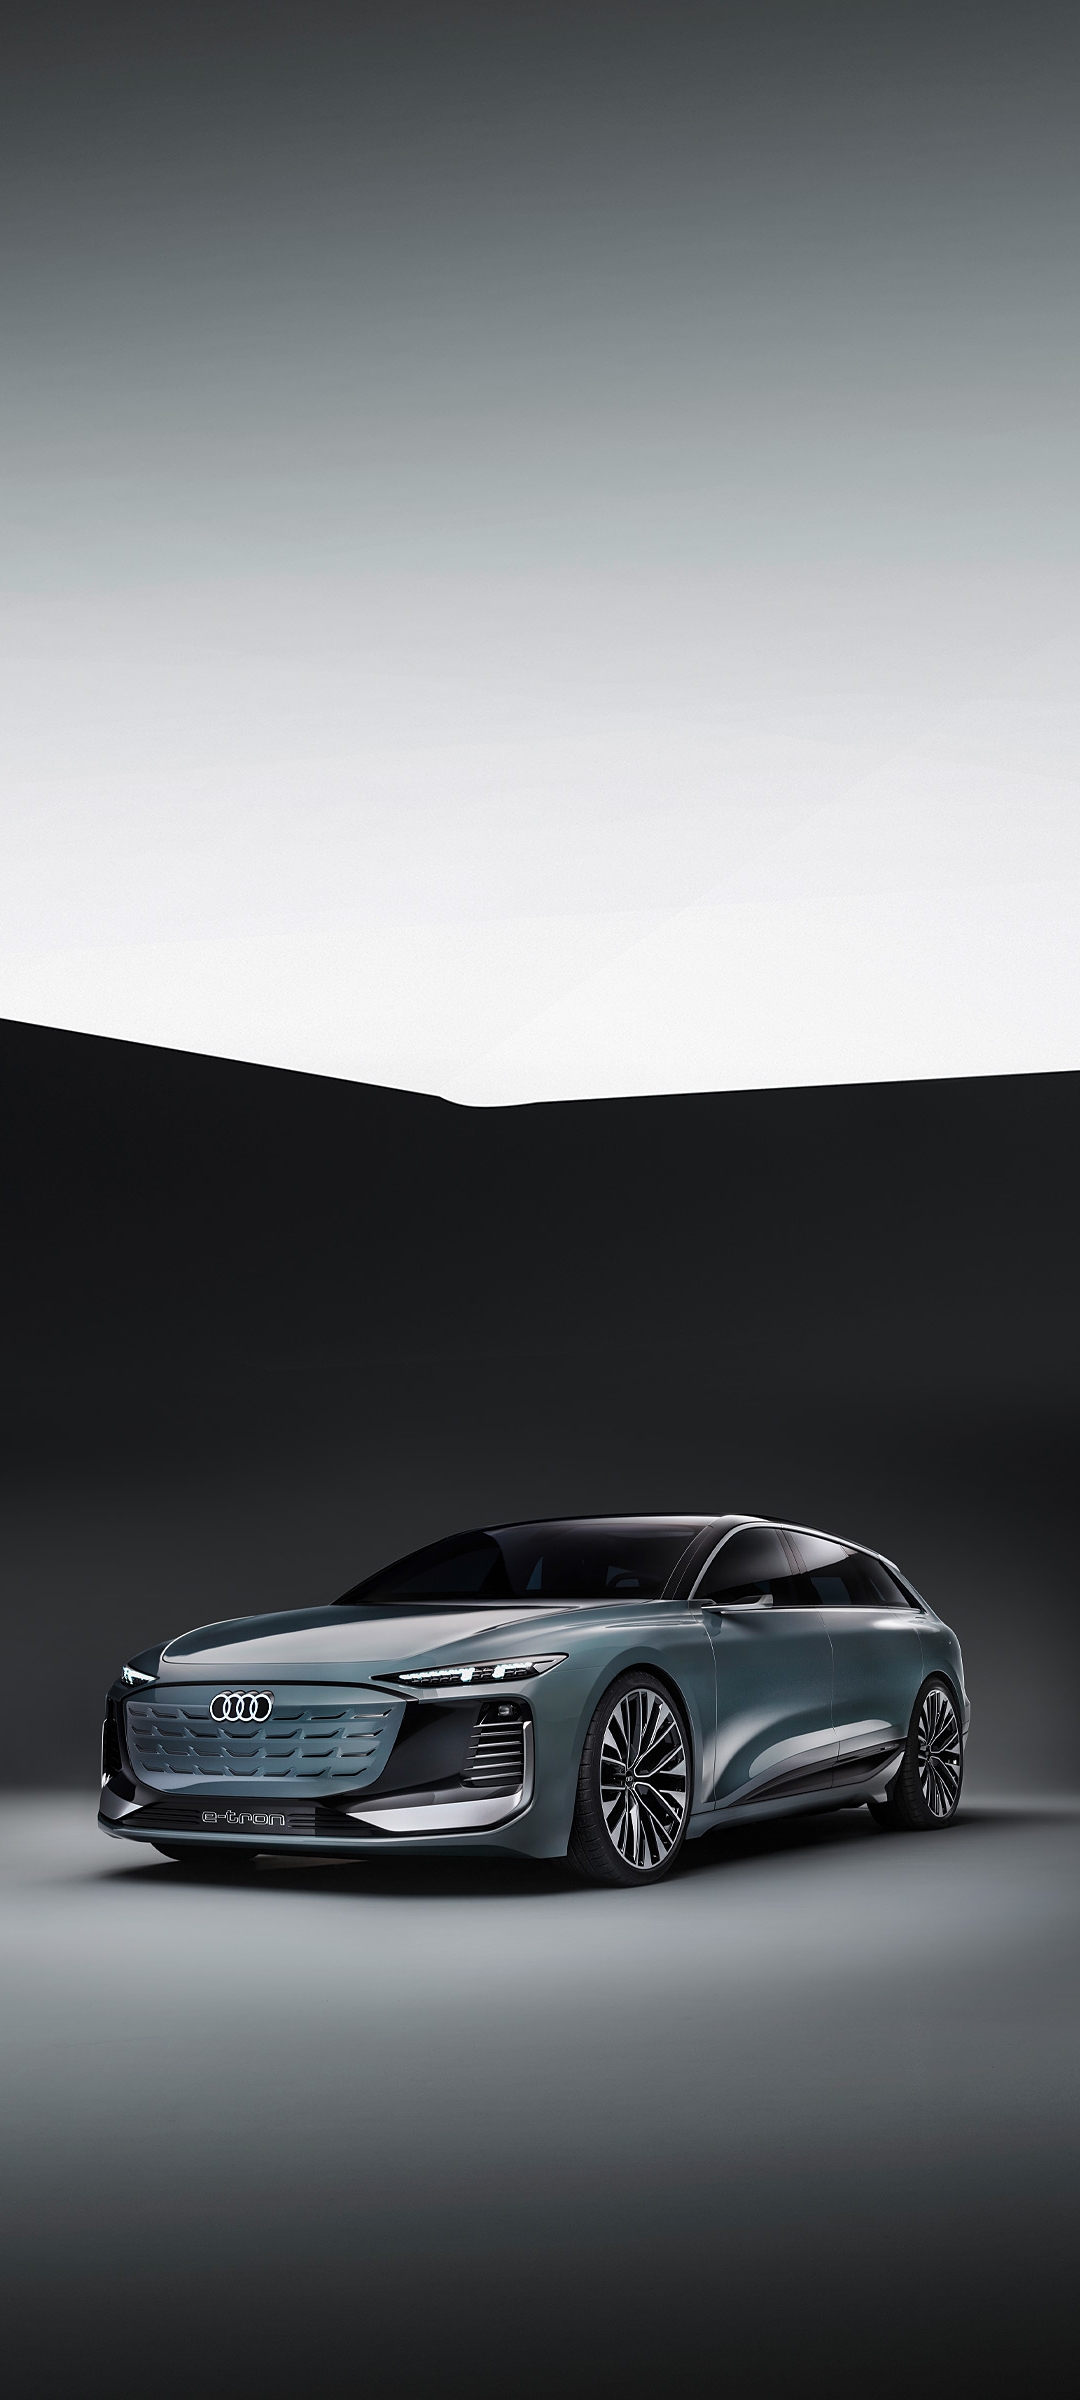  Audi A6 E Tron HD Android Wallpapers